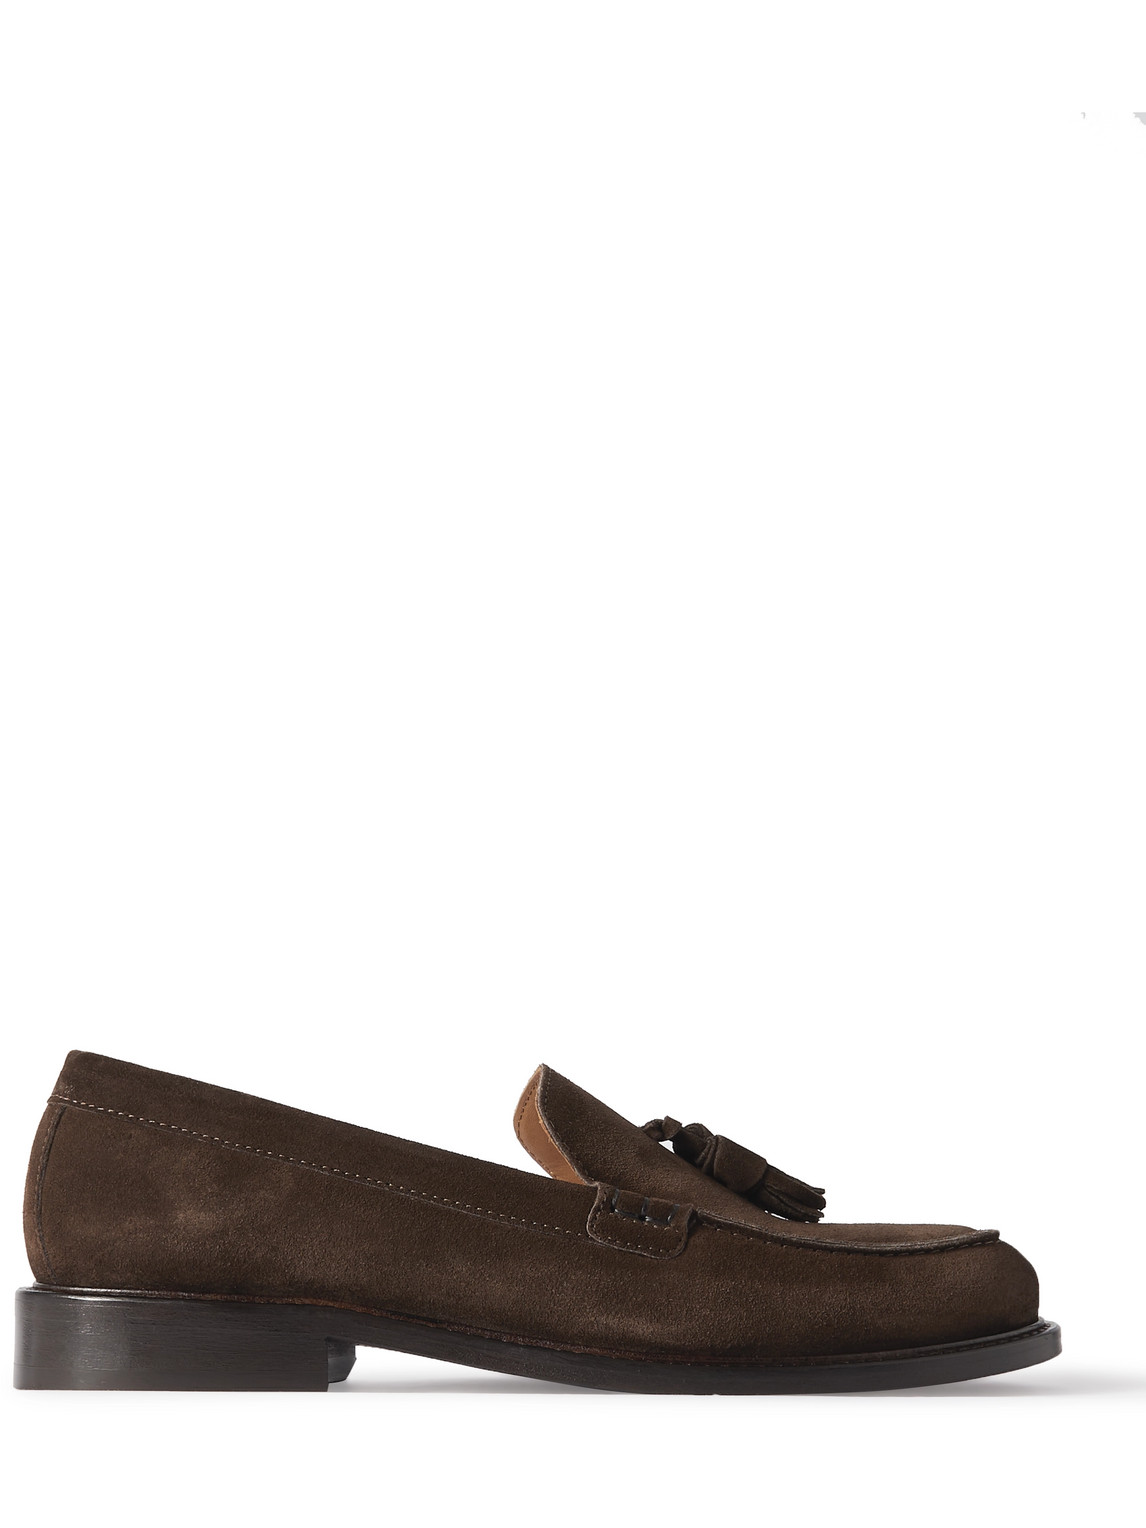 Mr P. Scott Suede Penny Loafers In Brown